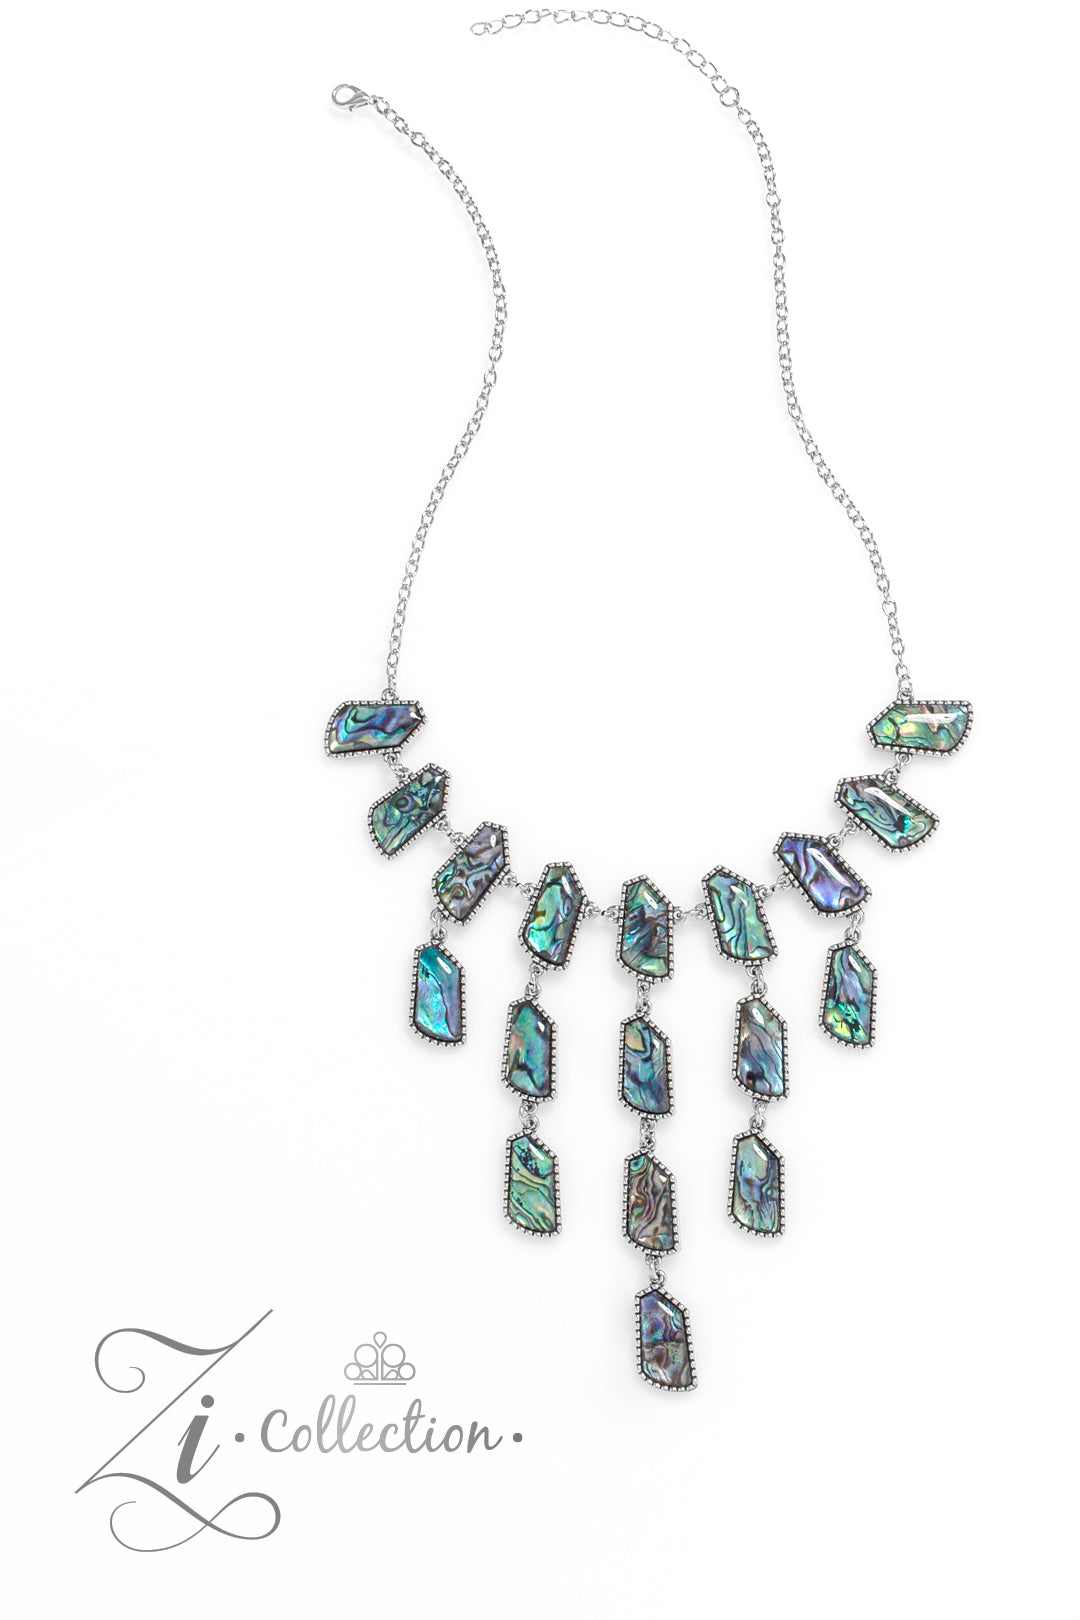 Abalone shells swirled in dreamy, reflective hues of blue, purple, and green are cut into abstract geometric shapes and set into studded silver frames. Silver chain links connect a row of shells that bows along the neckline, anchoring a cascade of pearlescent tassels that taper into a shimmery fringe. Features an adjustable clasp closure. Due to its prismatic palette, color may vary.  Sold as one individual necklace. Includes one pair of matching earrings.